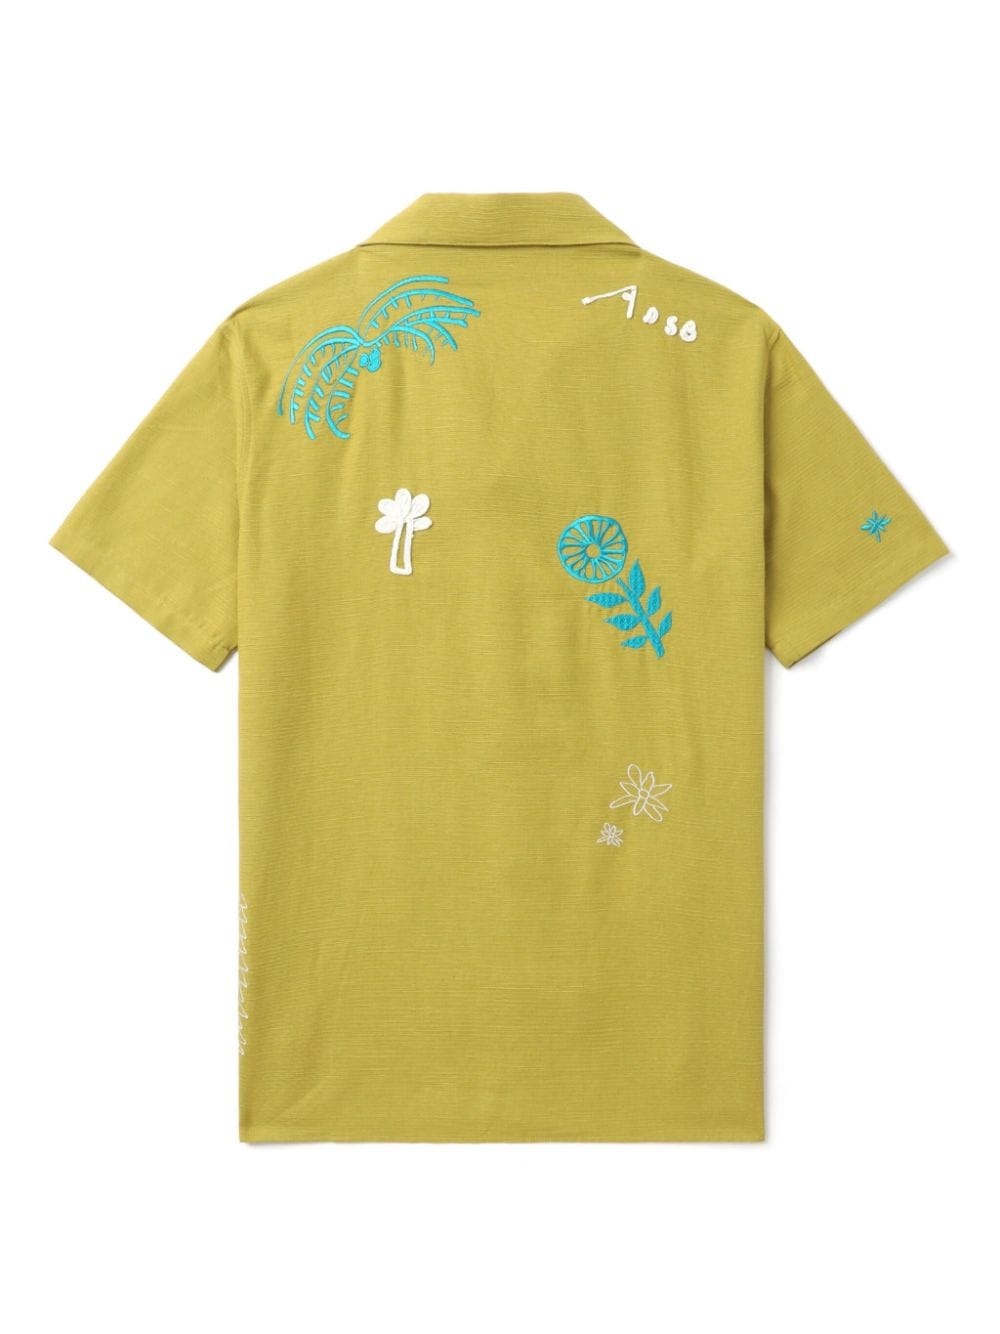 April-embroidery shirt - 6